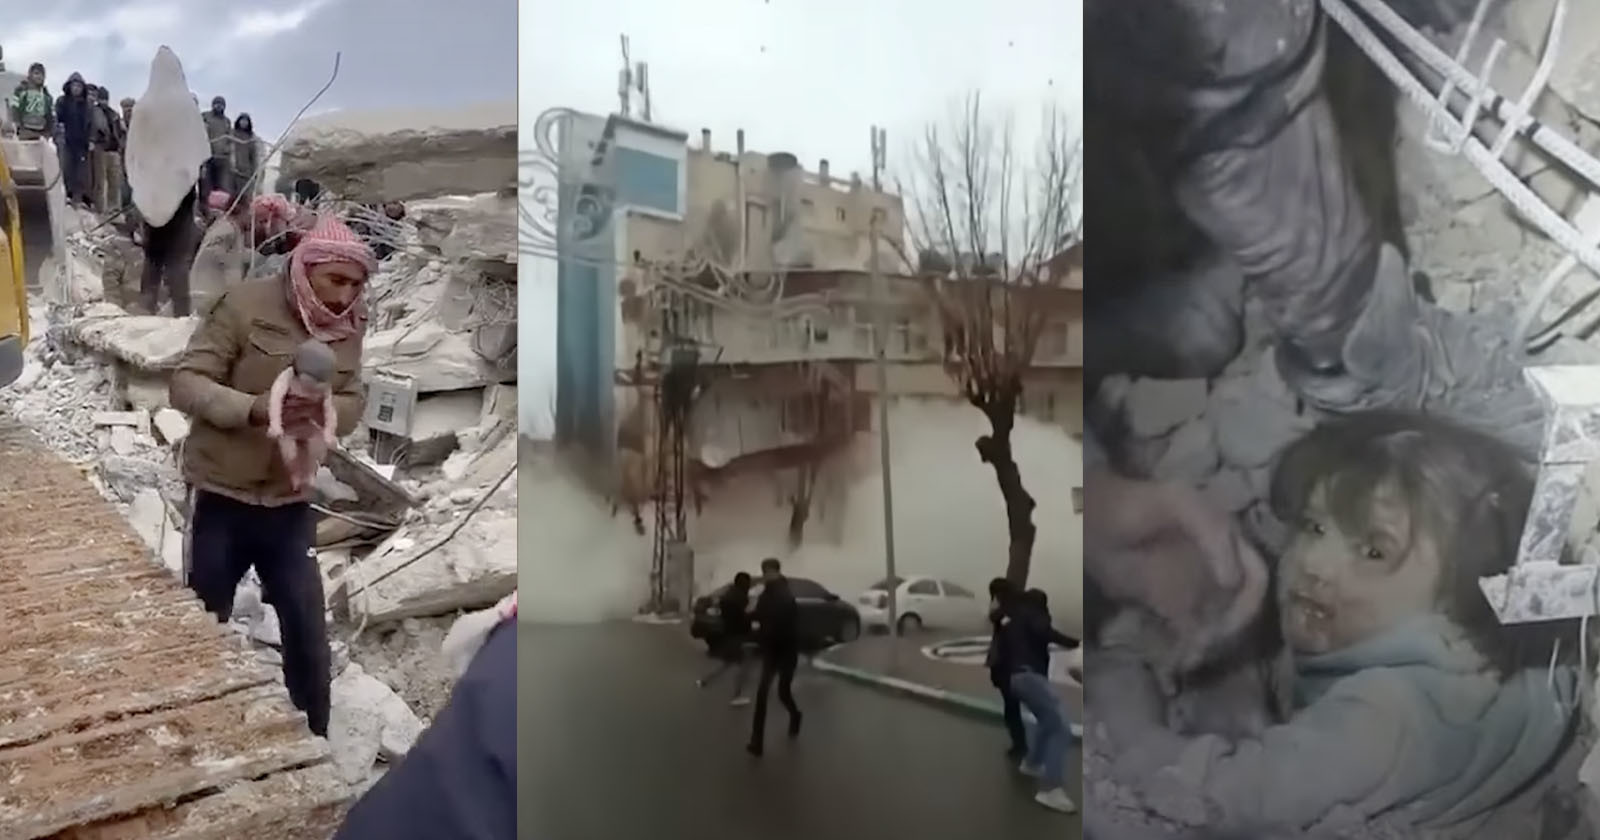 Heartbreaking Images from the Huge Earthquake in Turkey and Syria